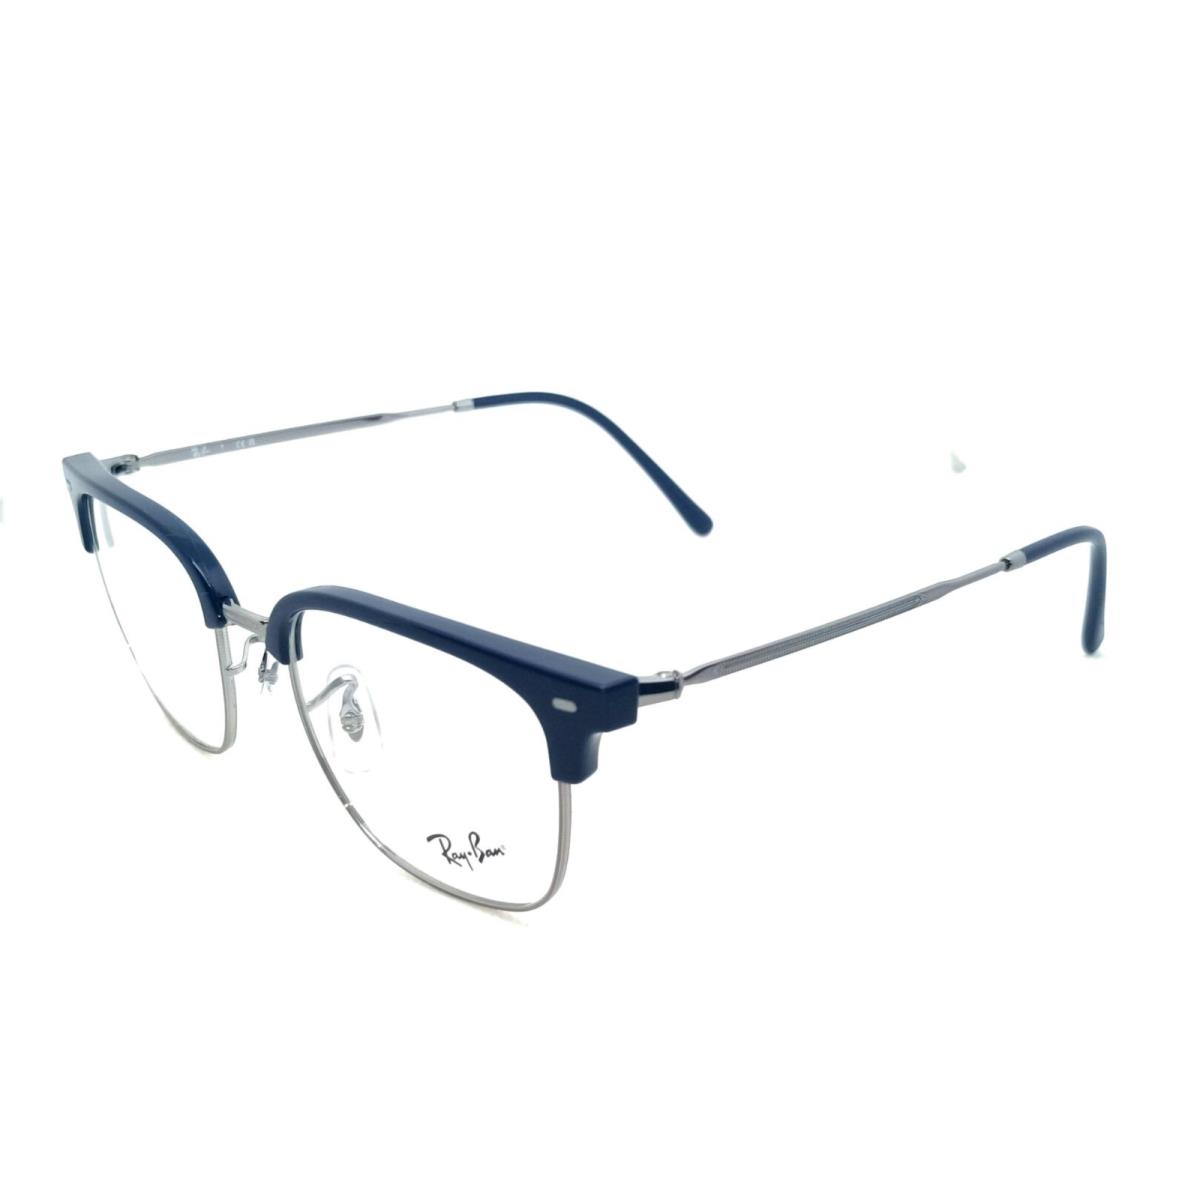 Ray-ban Clubmaster Reading Glasses RB 7216 8210 Blue Silver Frames Readers - Blue & Silver, Frame: Blue, Lens: Clear